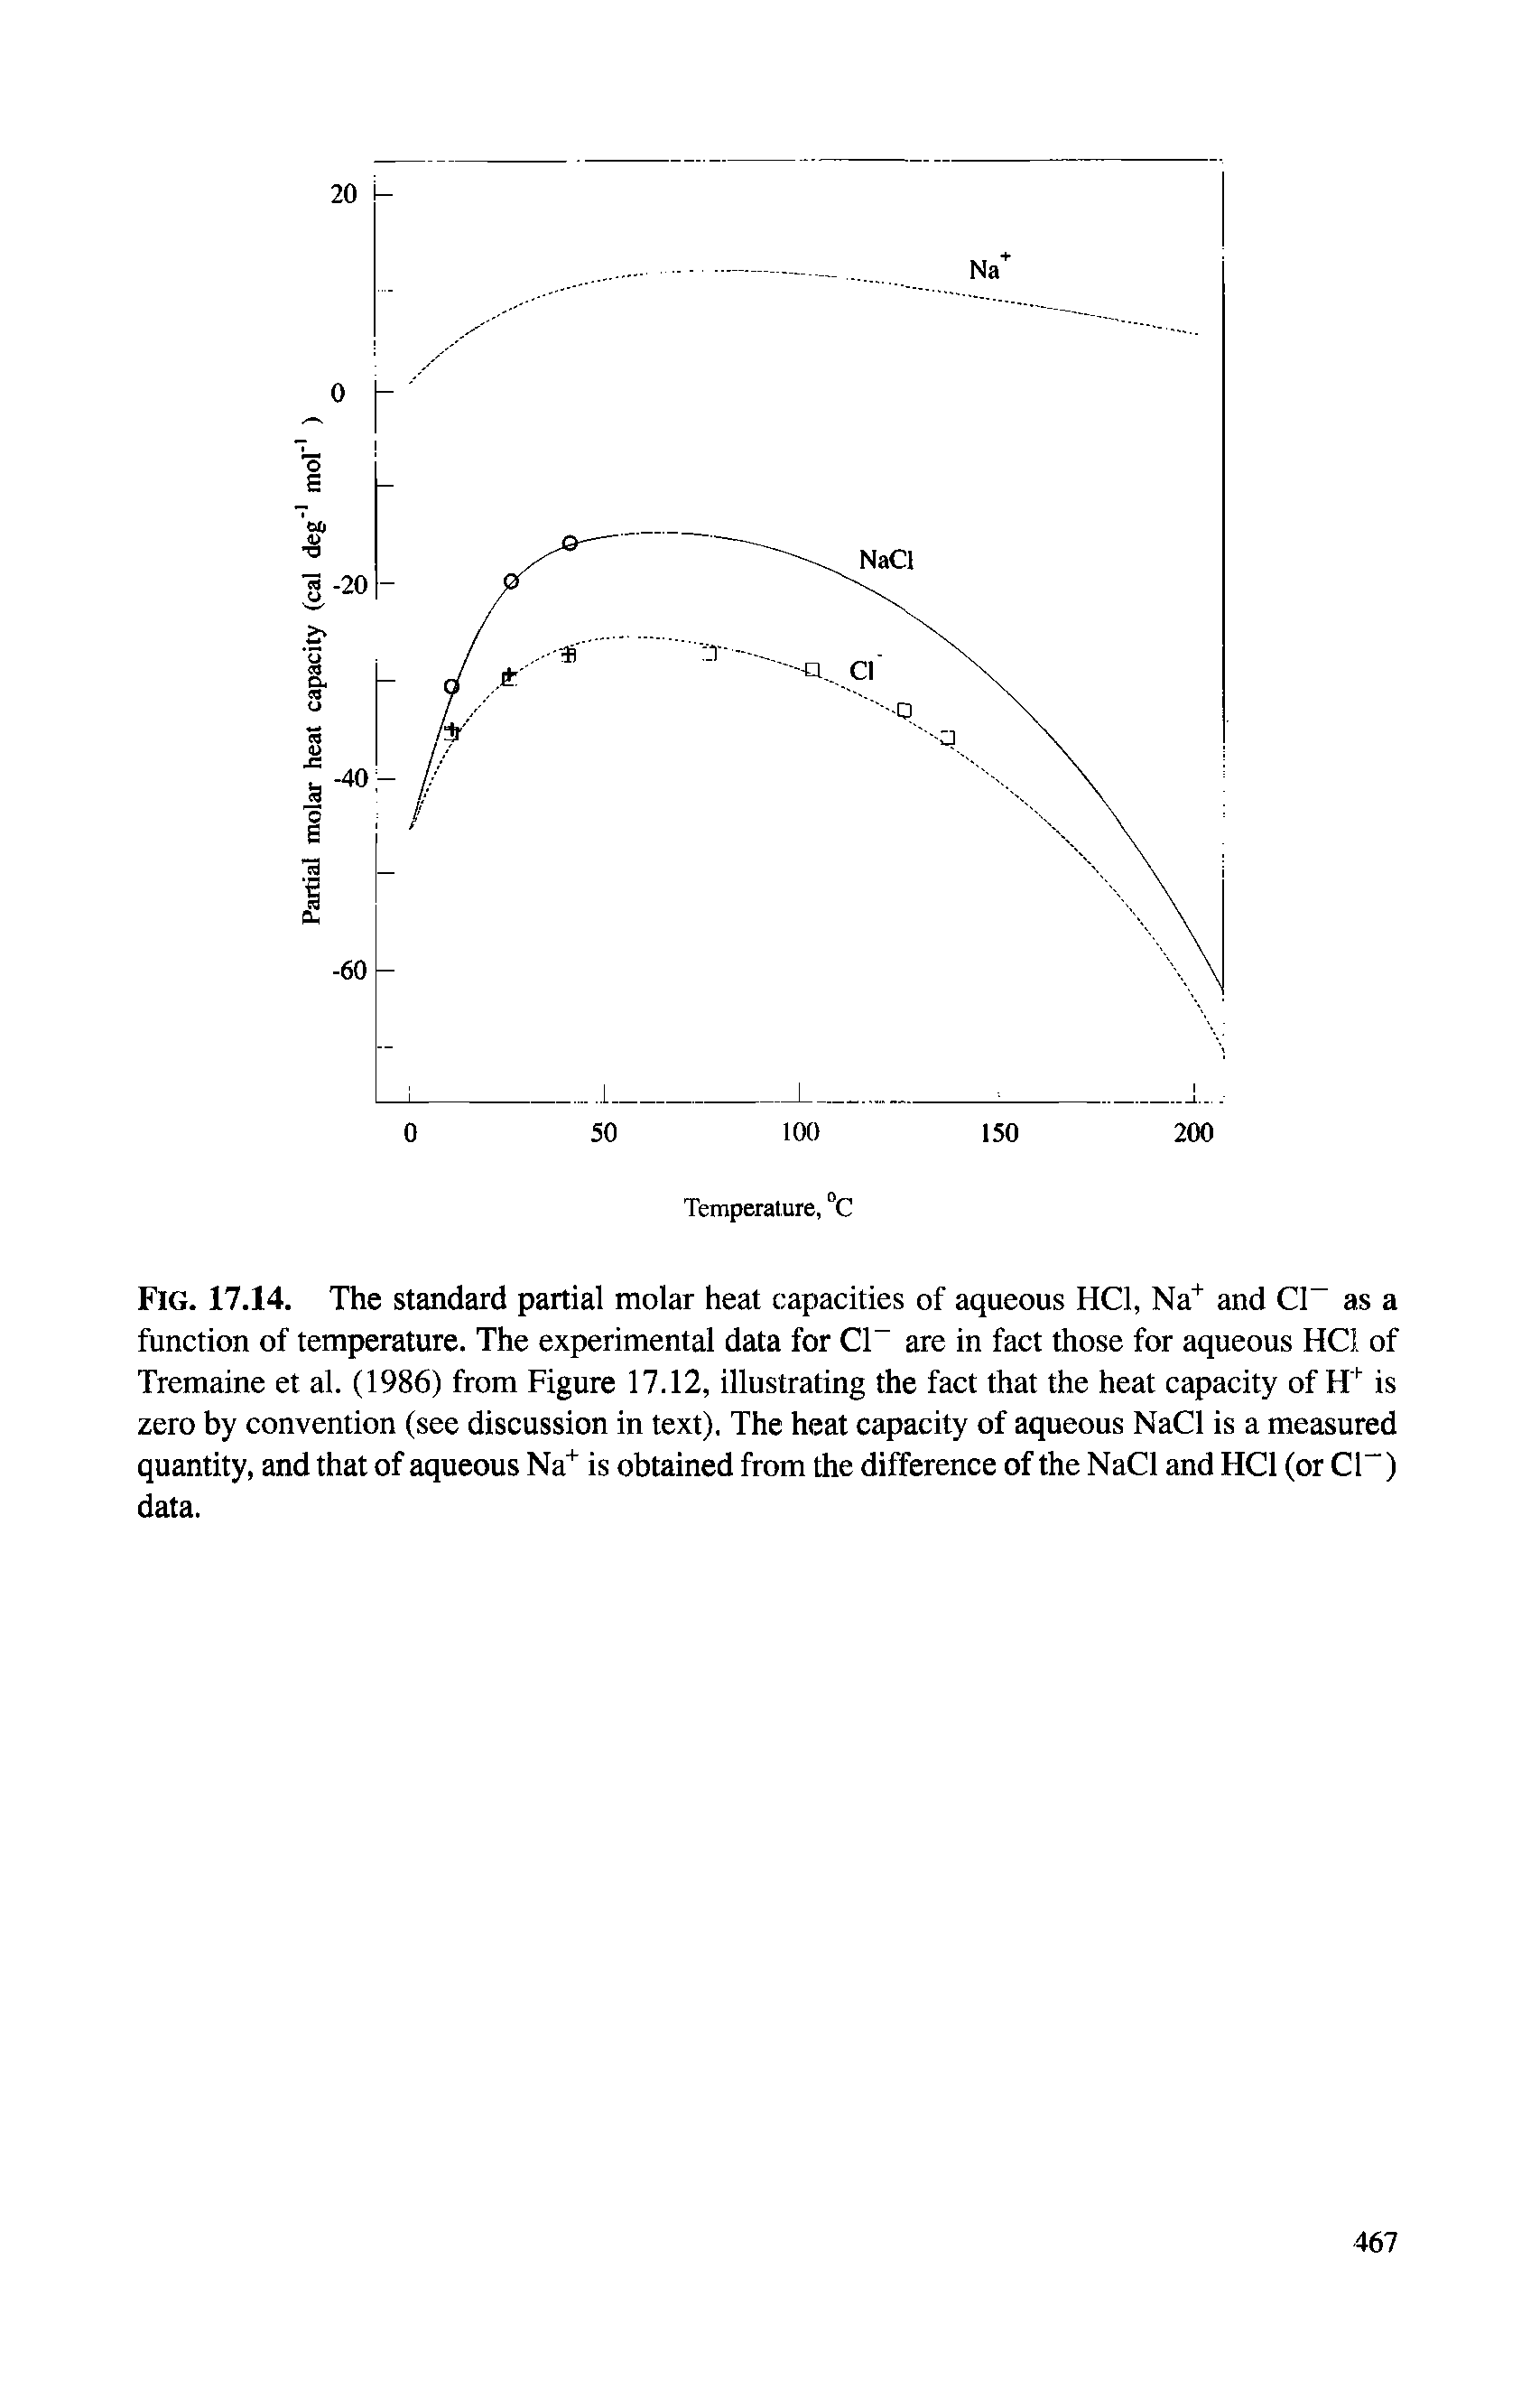 Fig. 17.14. The standard partial molar heat capacities of aqueous HCl, Na" and Cl as a function of temperature. The experimental data for Cl are in fact those for aqueous HCl of Tremaine et al. (1986) from Figure 17.12, illustrating the fact that the heat capacity of is zero by convention (see discussion in text). The heat capacity of aqueous NaCl is a measured quantity, and that of aqueous Na is obtained from the difference of the NaCl and HCl (or Cl ) data.